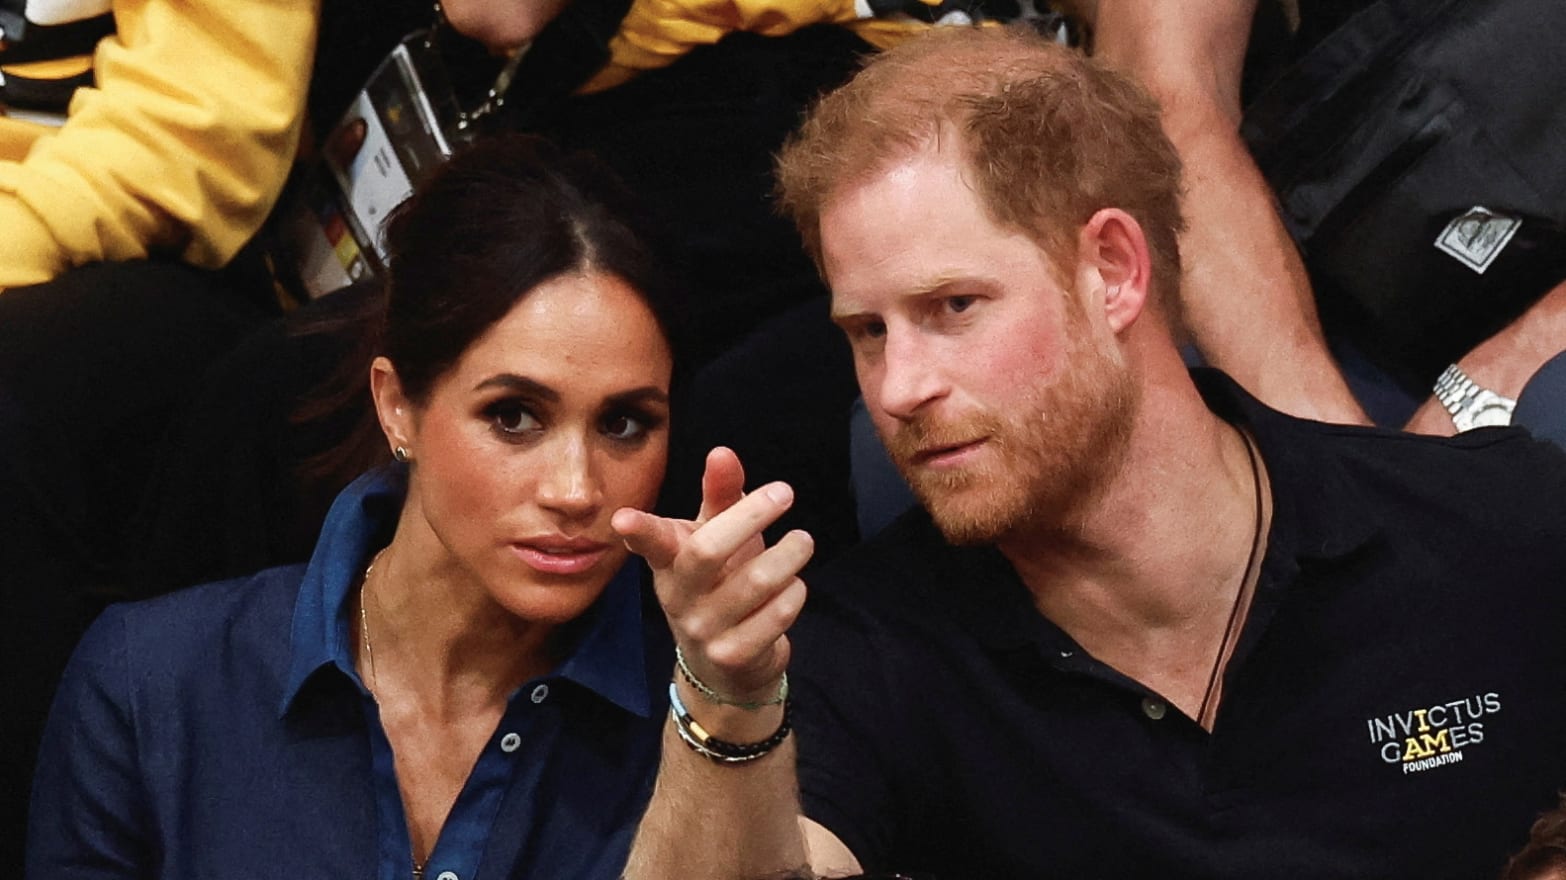 Prince Harry, Duke of Sussex and his wife Meghan, Duchess of Sussex